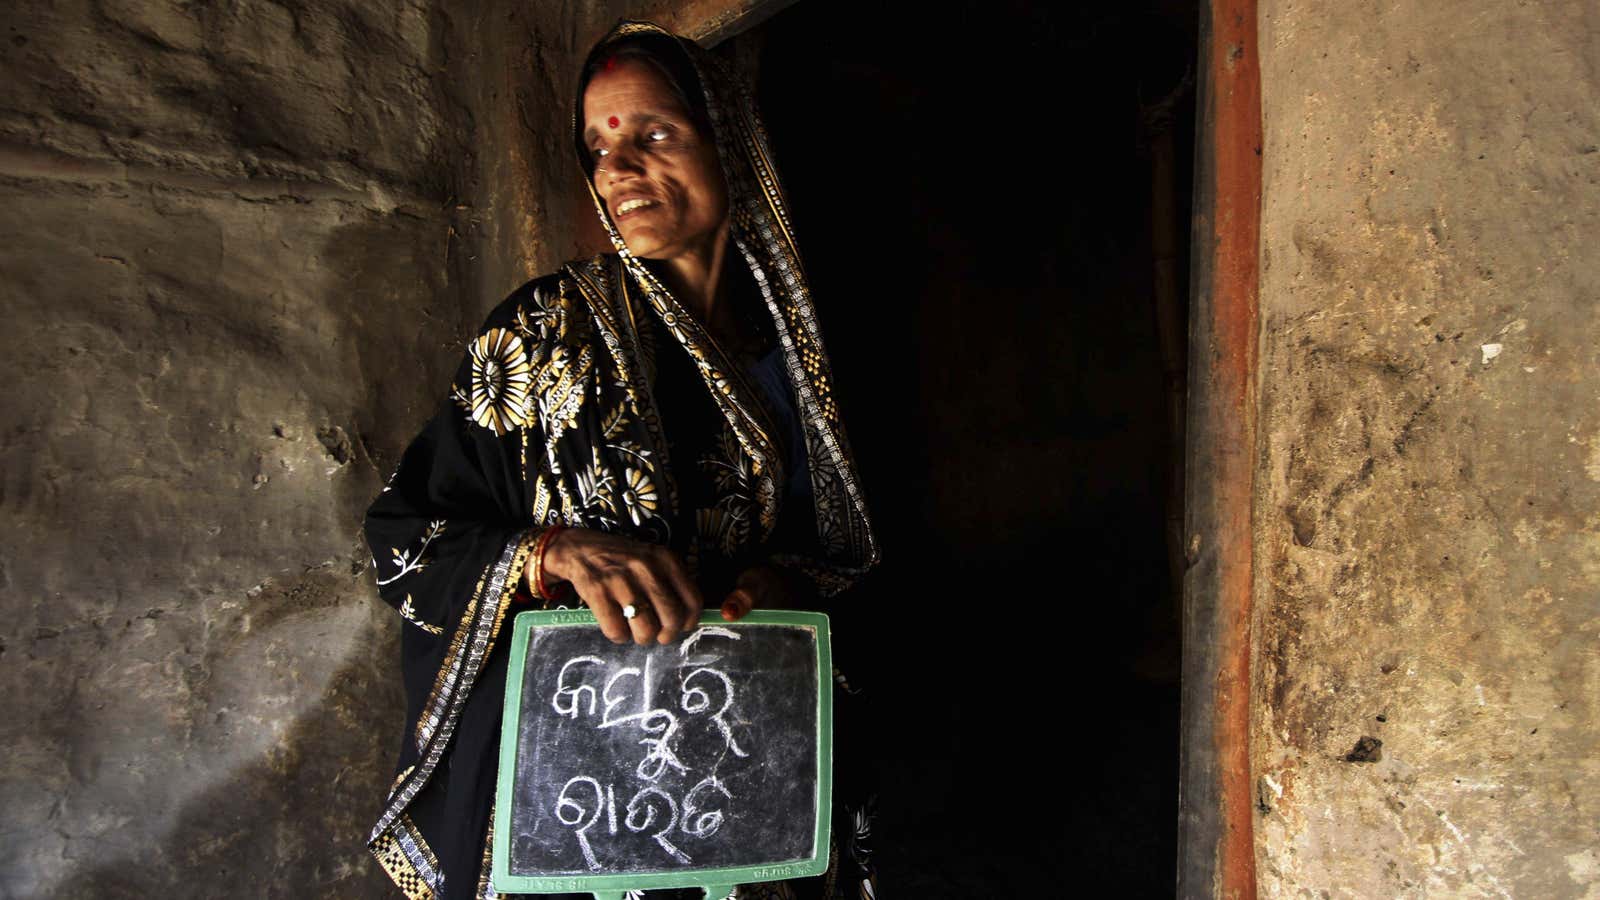 Literacy among women has improved, but gaps in education remain.